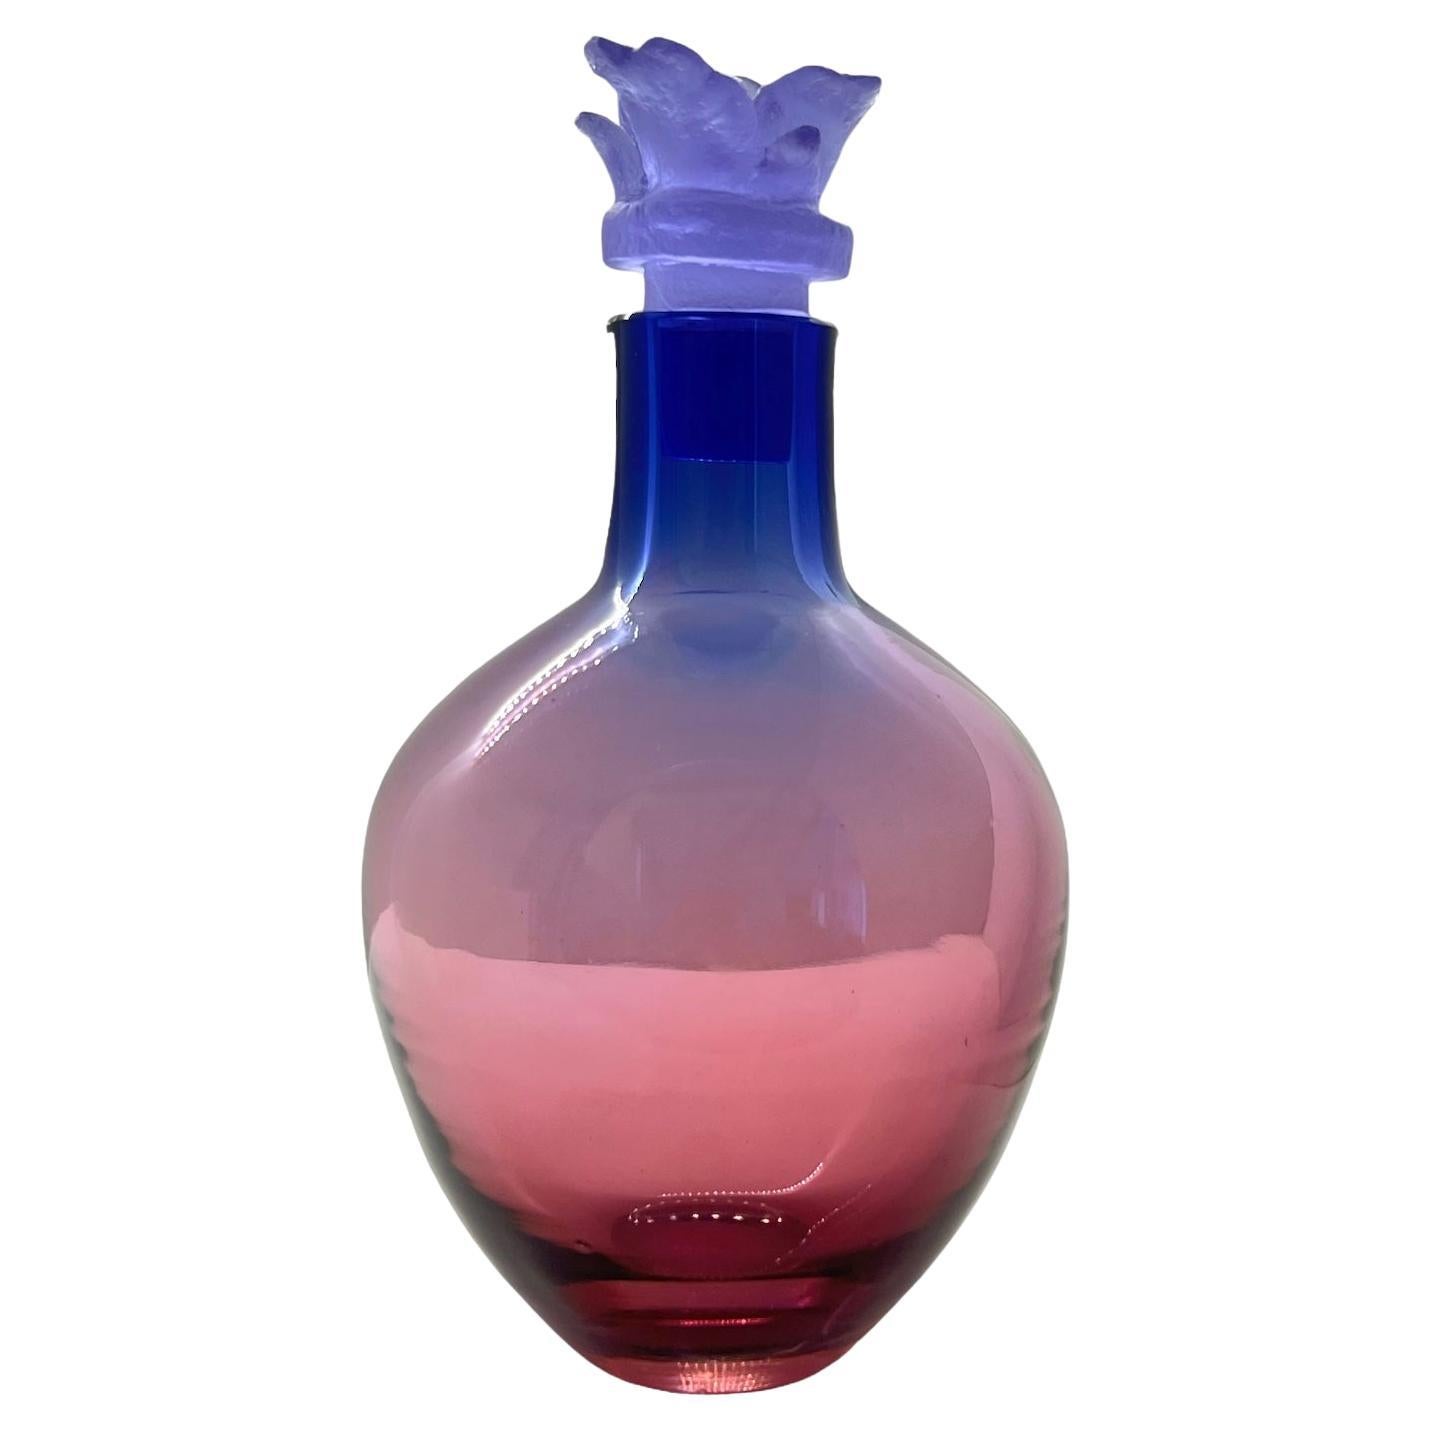 Liquor Decanter in Pink Violet Blue Glass with Hand Crafted Rose Stopper